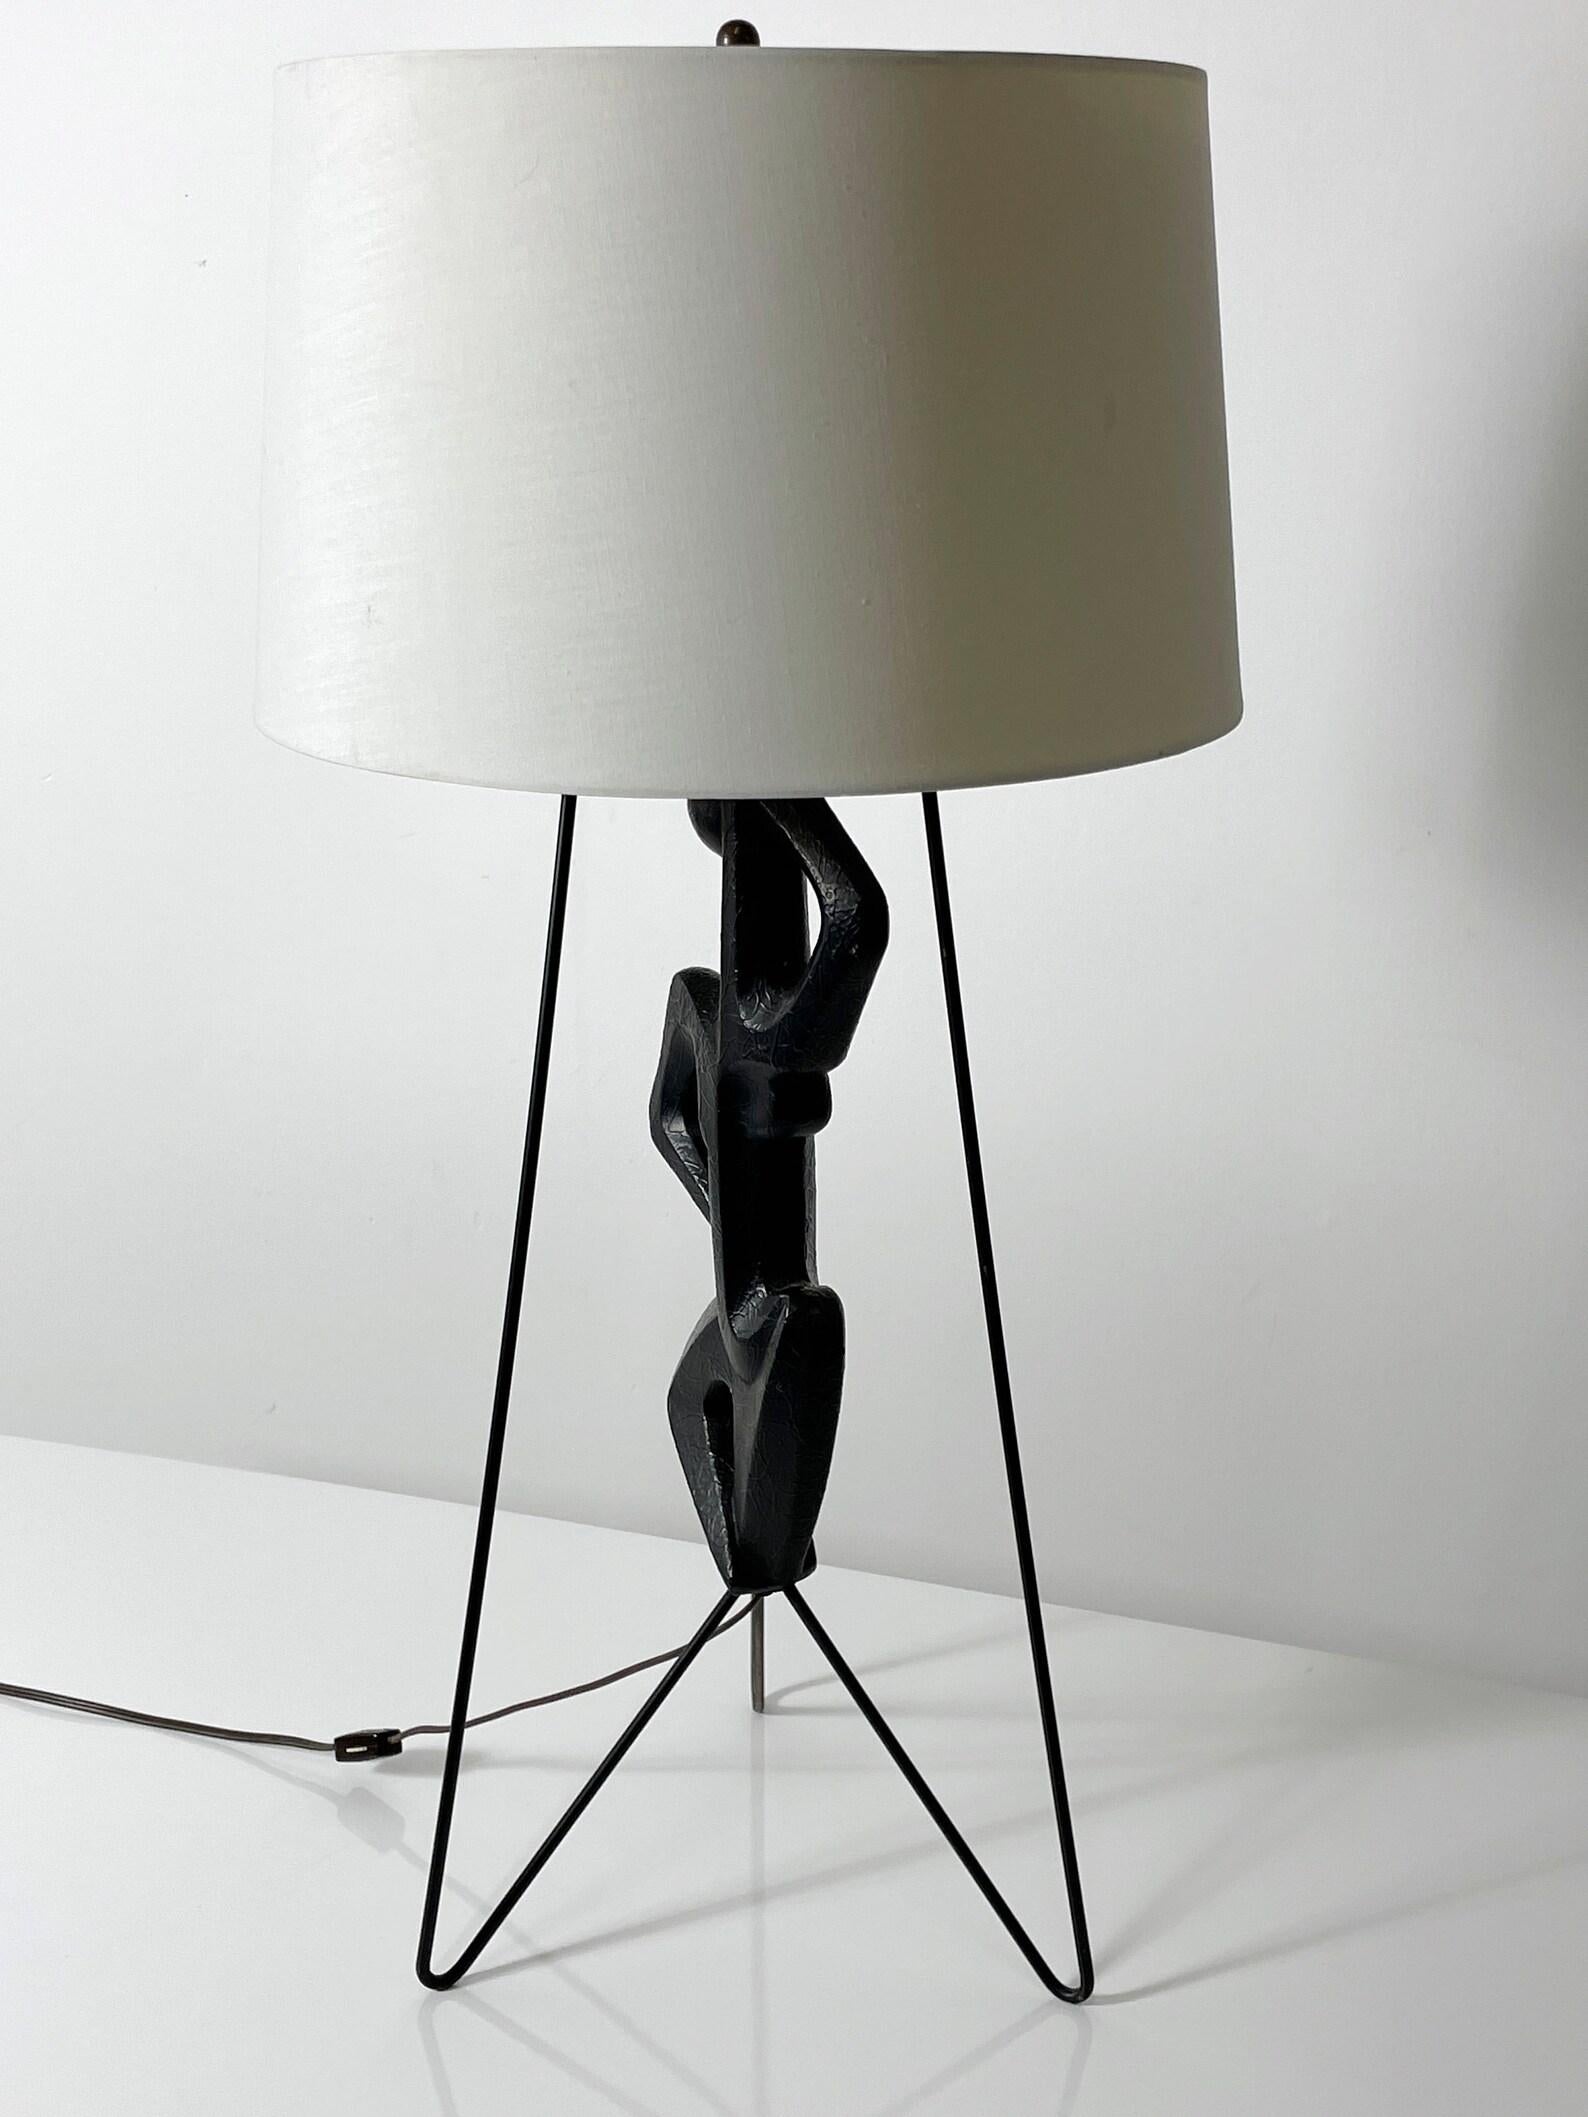 Modernist Frederic Weinberg Figural Iron Hairpin Table Lamp 1950s  For Sale 3